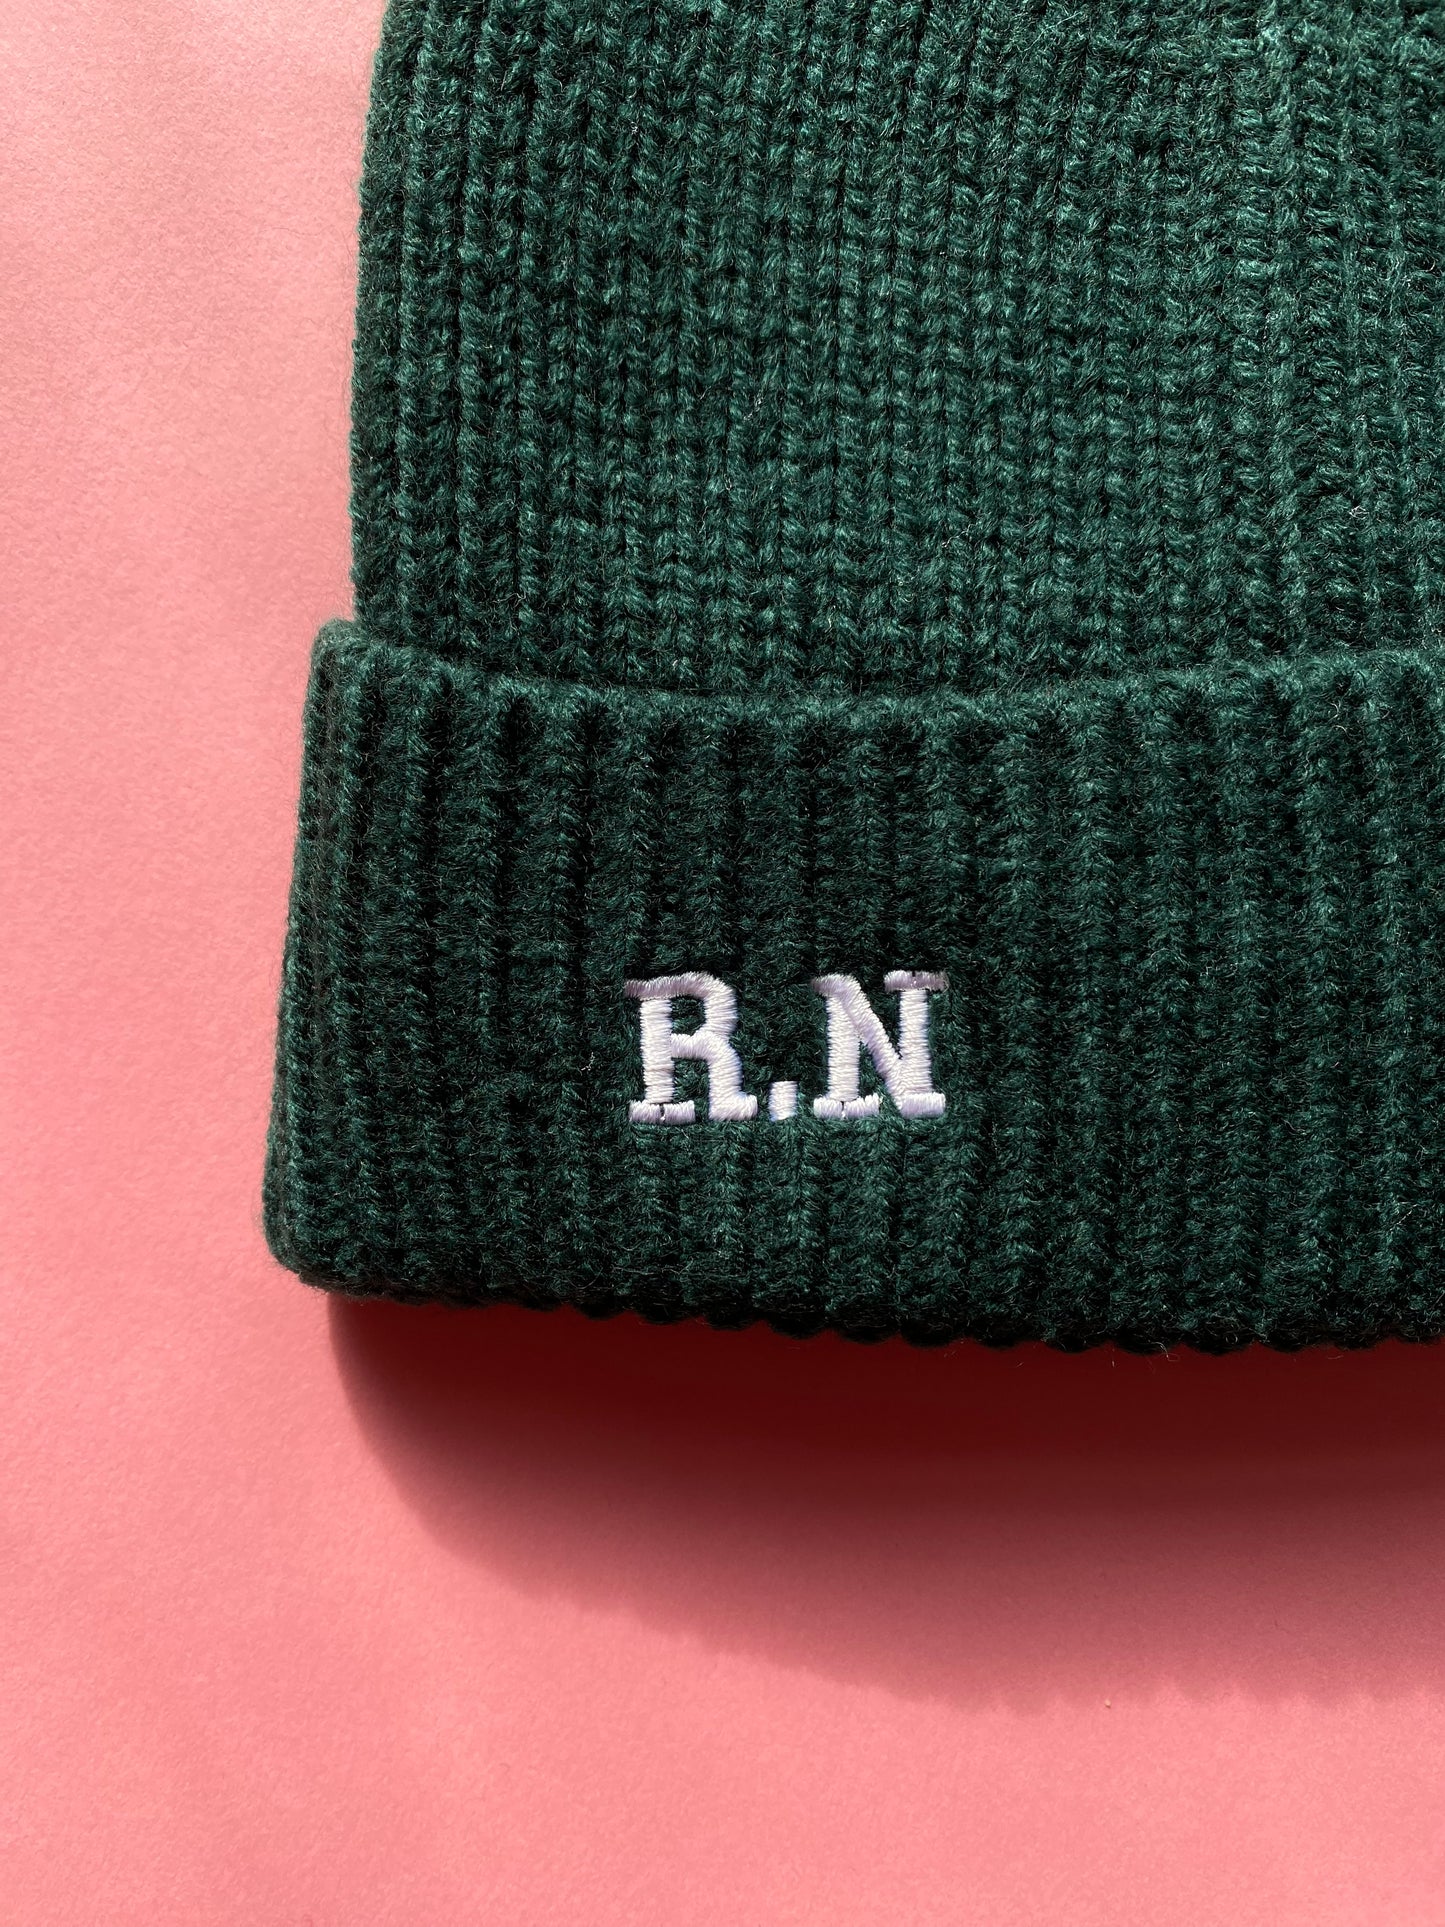 R.N Initials Embroidered Beanie Hat - Forest Green SALE